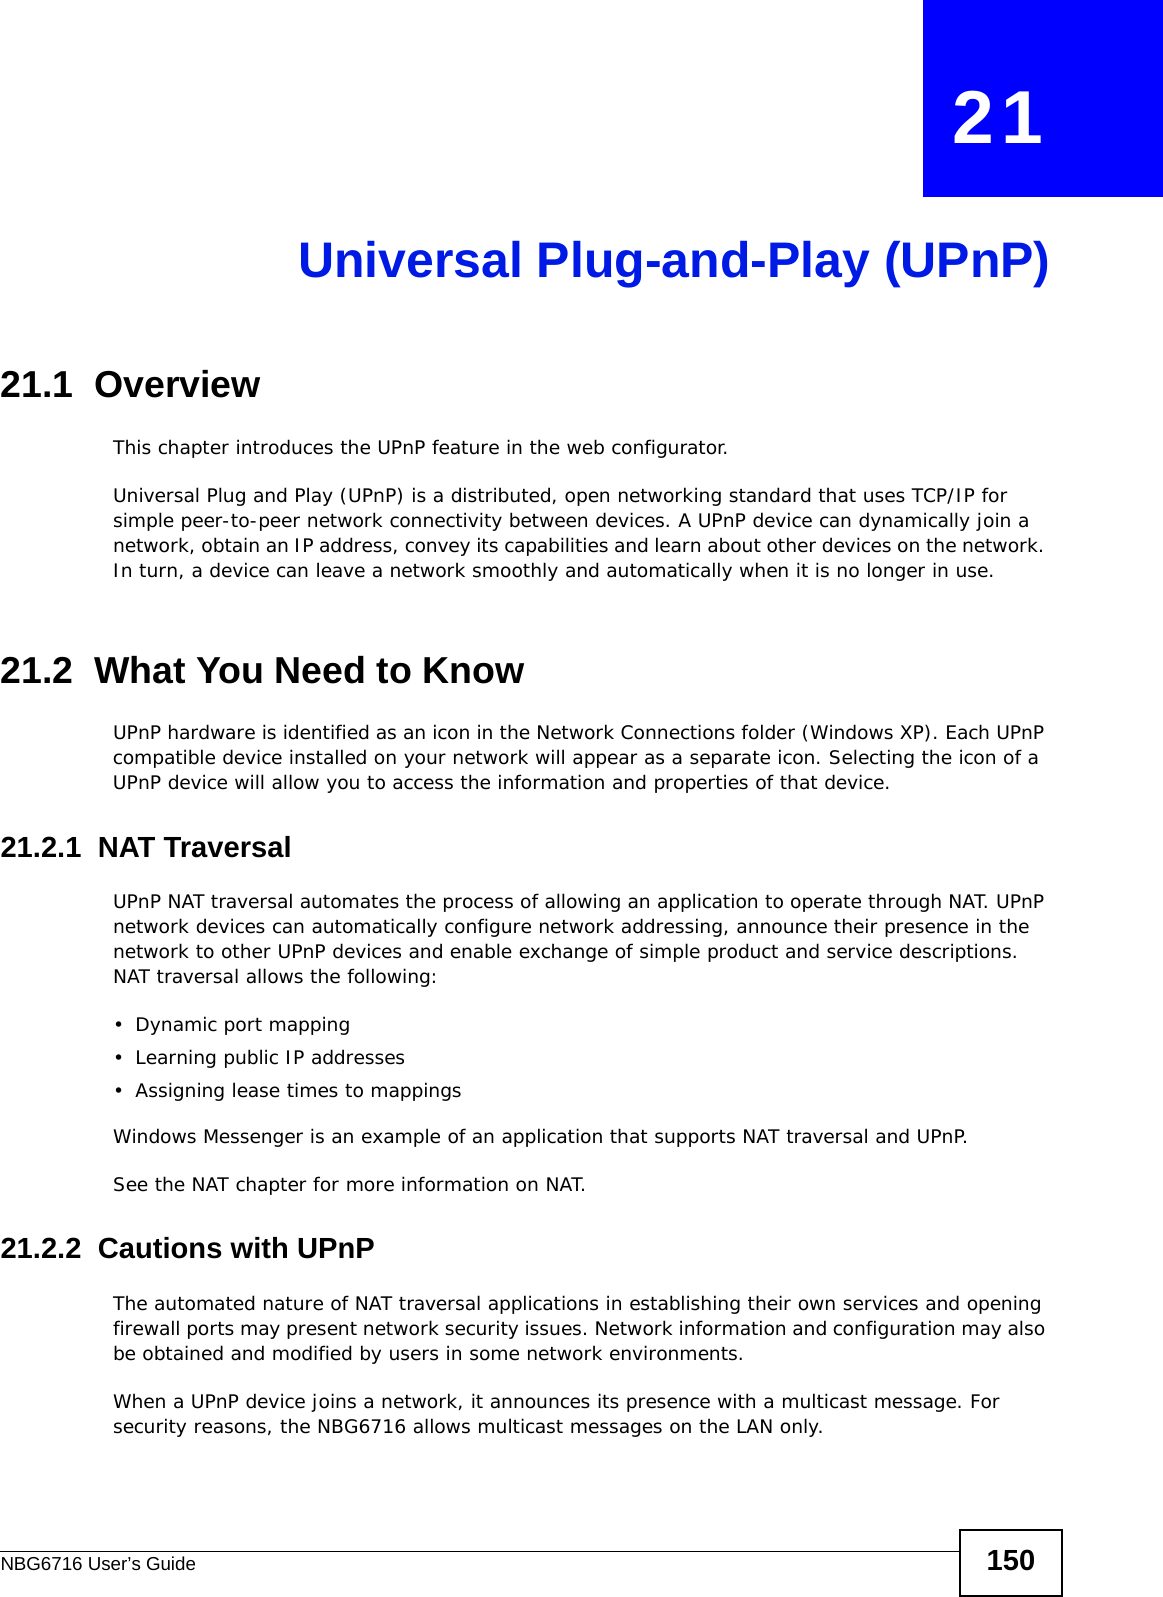 NBG6716 User’s Guide 150CHAPTER   21Universal Plug-and-Play (UPnP)21.1  Overview This chapter introduces the UPnP feature in the web configurator.Universal Plug and Play (UPnP) is a distributed, open networking standard that uses TCP/IP for simple peer-to-peer network connectivity between devices. A UPnP device can dynamically join a network, obtain an IP address, convey its capabilities and learn about other devices on the network. In turn, a device can leave a network smoothly and automatically when it is no longer in use.21.2  What You Need to KnowUPnP hardware is identified as an icon in the Network Connections folder (Windows XP). Each UPnP compatible device installed on your network will appear as a separate icon. Selecting the icon of a UPnP device will allow you to access the information and properties of that device. 21.2.1  NAT TraversalUPnP NAT traversal automates the process of allowing an application to operate through NAT. UPnP network devices can automatically configure network addressing, announce their presence in the network to other UPnP devices and enable exchange of simple product and service descriptions. NAT traversal allows the following:• Dynamic port mapping• Learning public IP addresses• Assigning lease times to mappingsWindows Messenger is an example of an application that supports NAT traversal and UPnP. See the NAT chapter for more information on NAT.21.2.2  Cautions with UPnPThe automated nature of NAT traversal applications in establishing their own services and opening firewall ports may present network security issues. Network information and configuration may also be obtained and modified by users in some network environments. When a UPnP device joins a network, it announces its presence with a multicast message. For security reasons, the NBG6716 allows multicast messages on the LAN only.